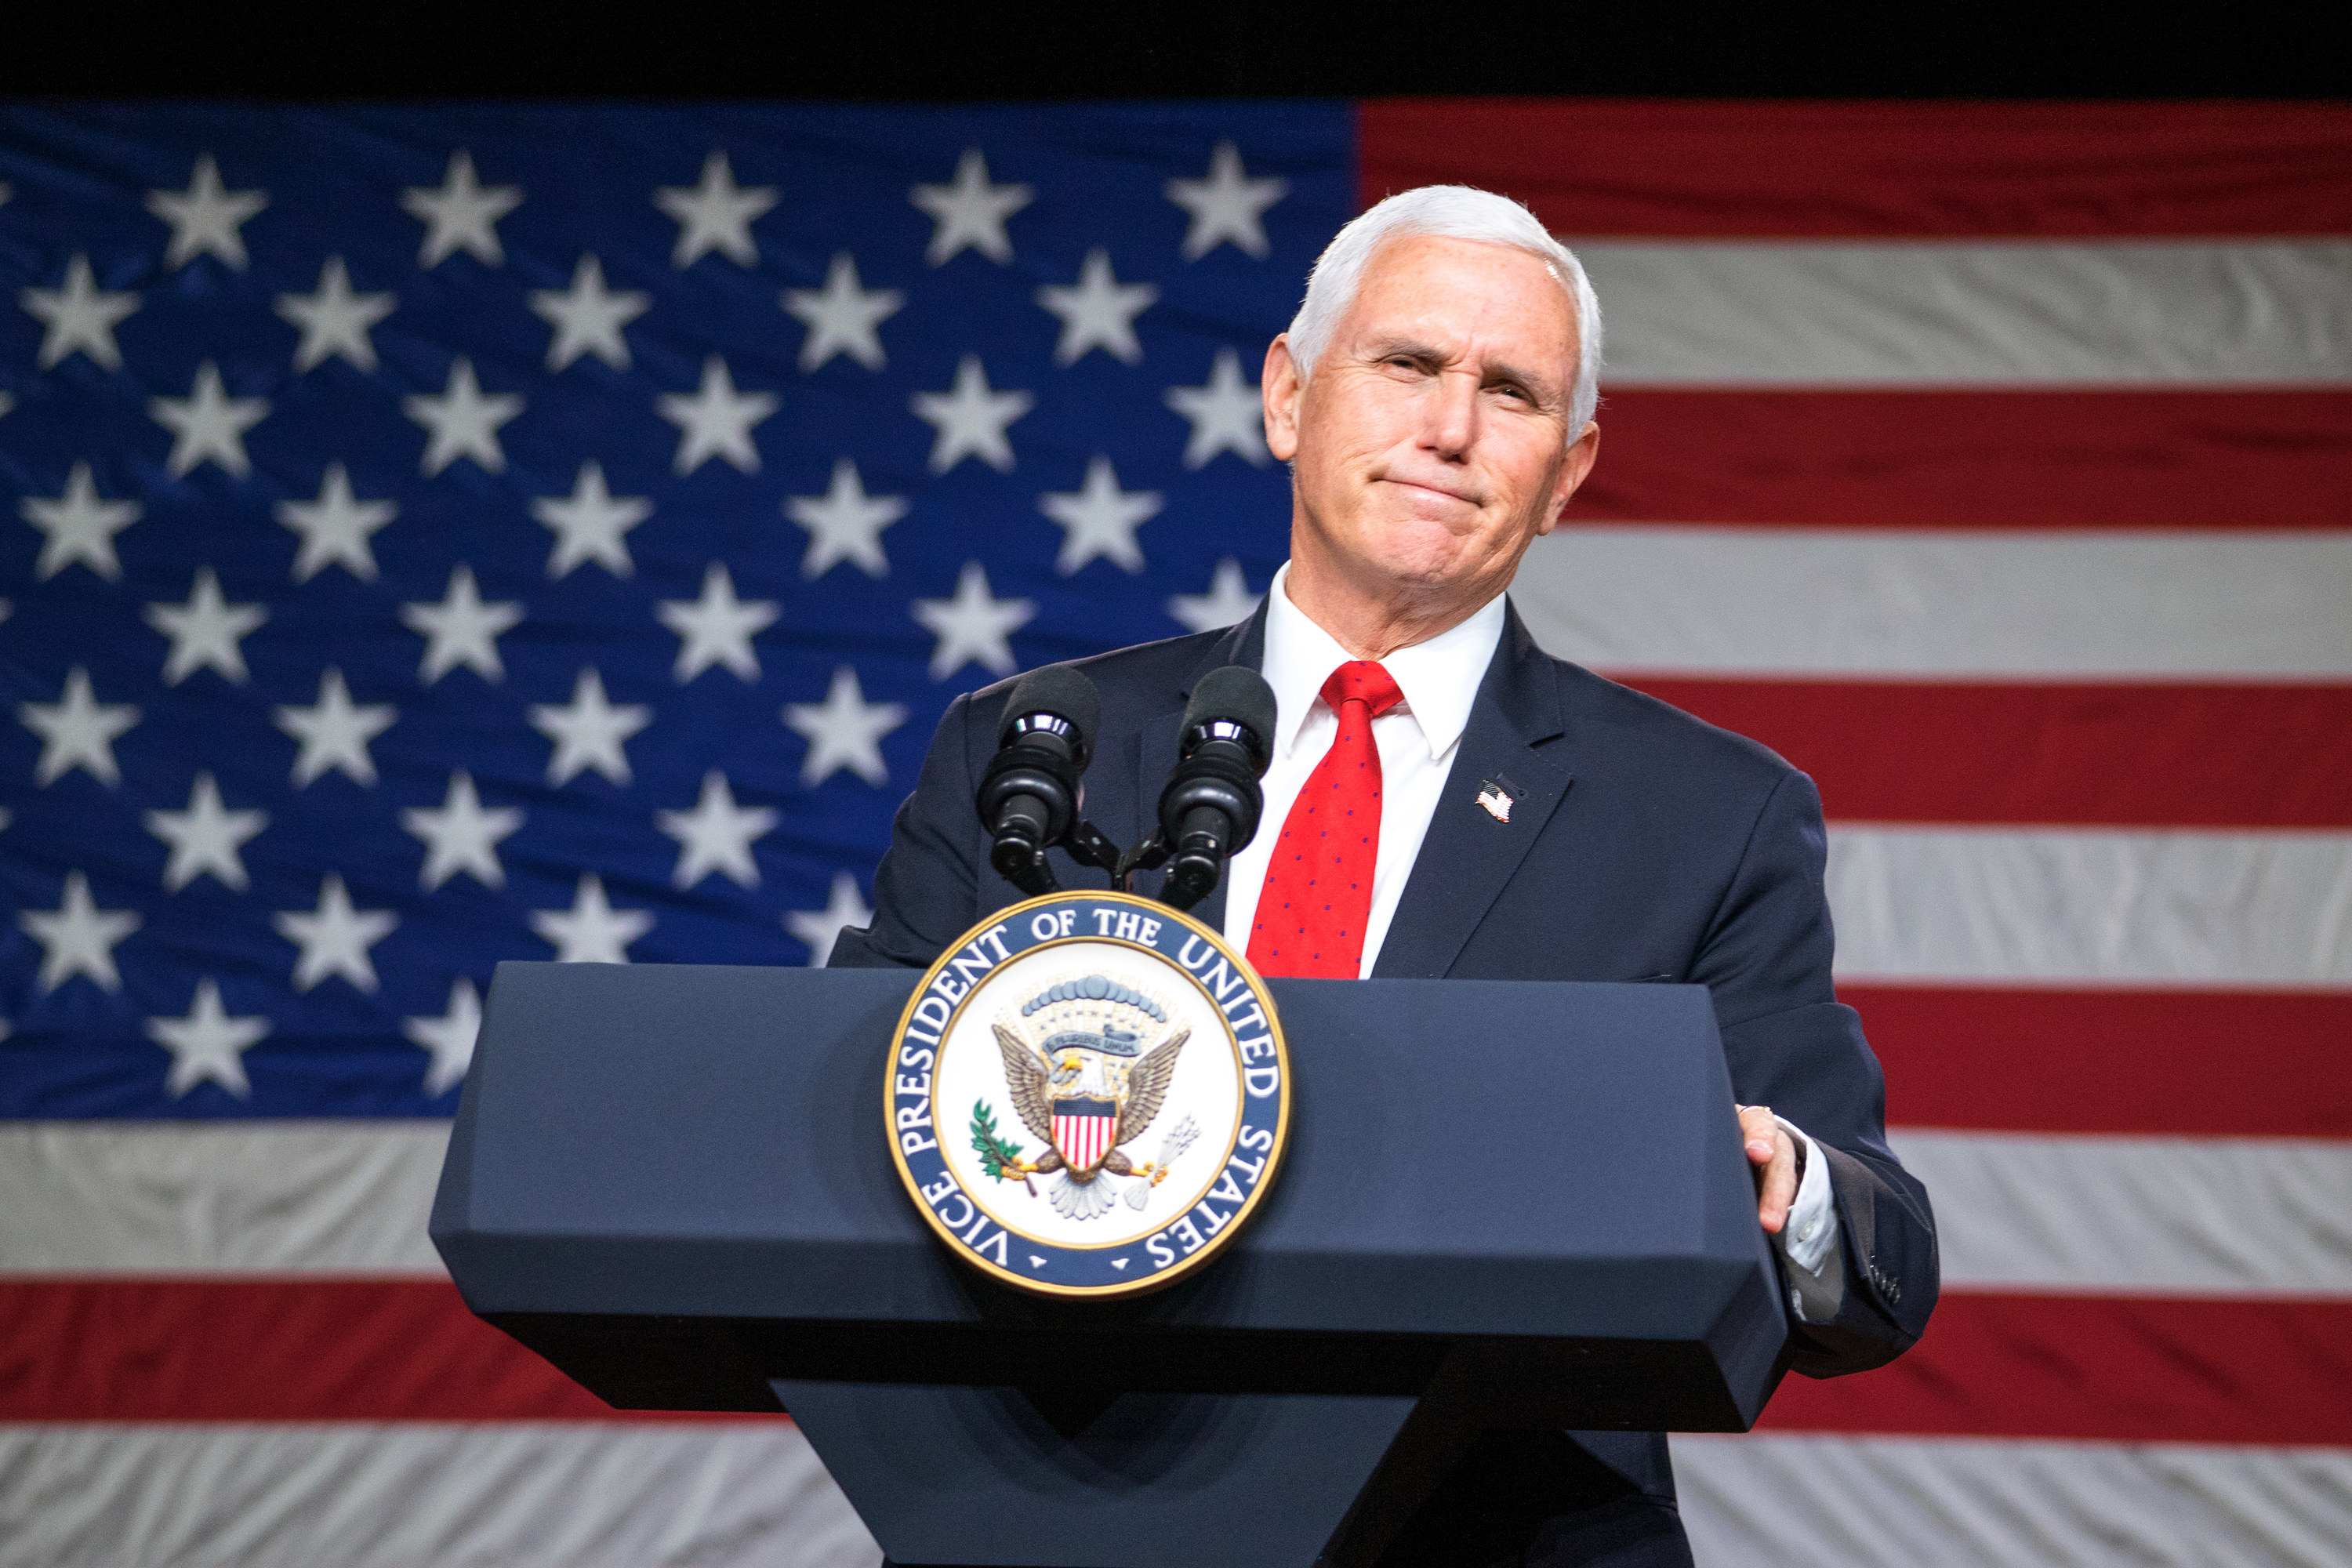 Mike Pence standing behind a podium